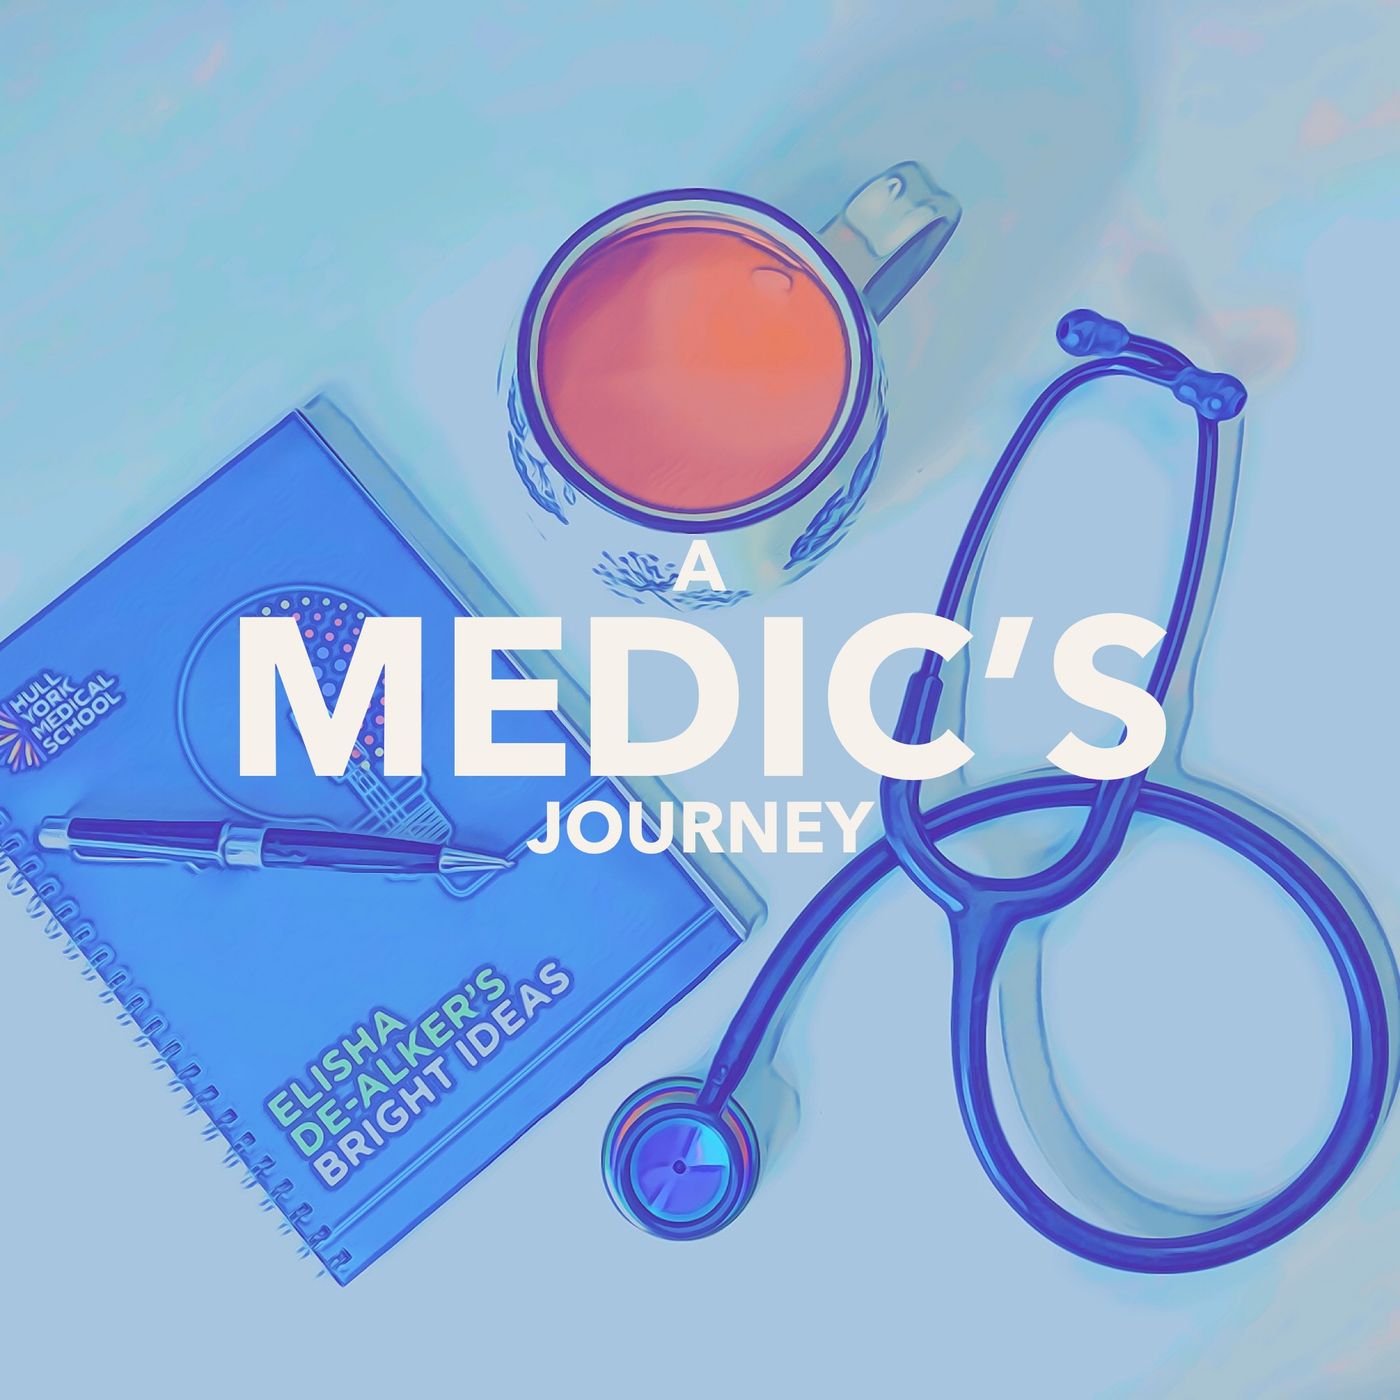 A Medic's Journey